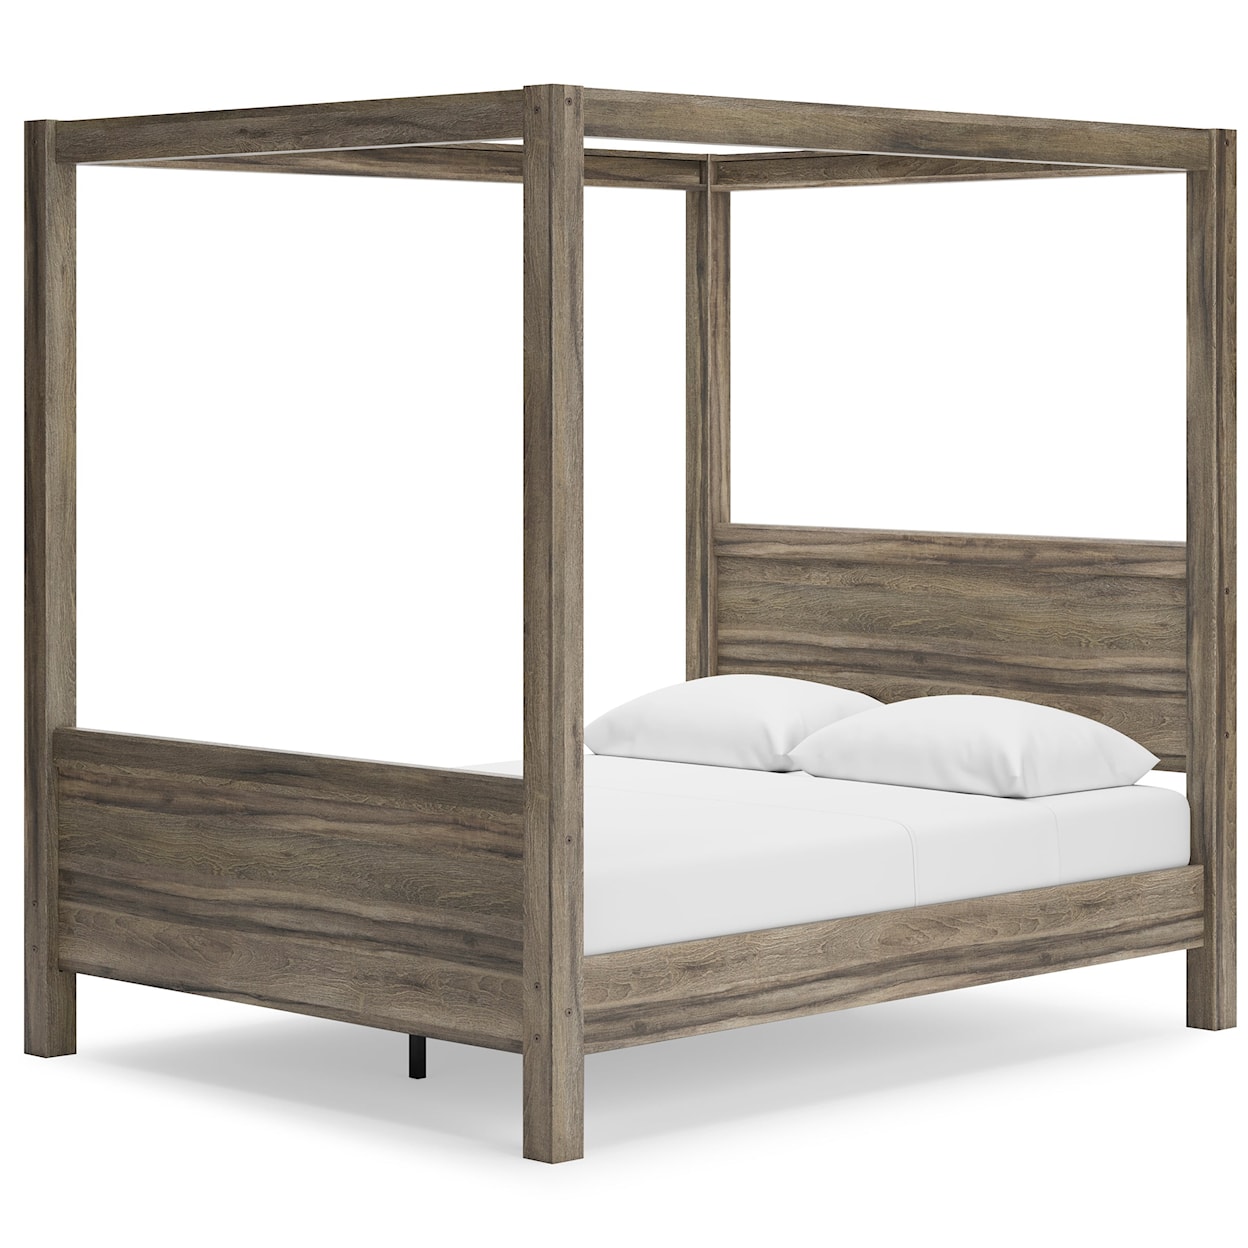 Signature Design by Ashley Furniture Shallifer Queen Canopy Bed